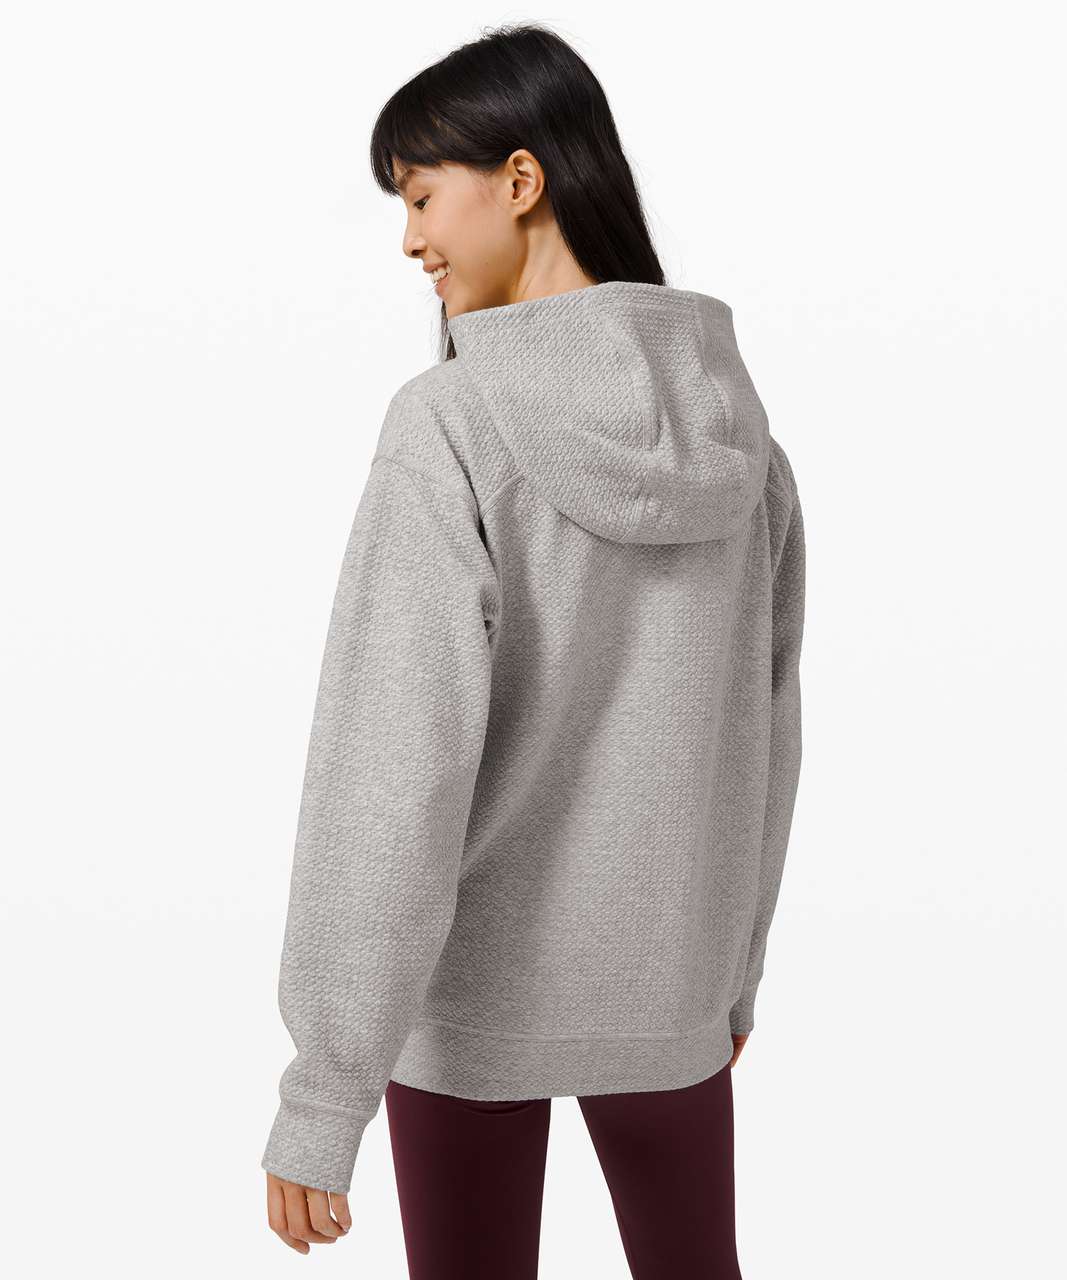 Lululemon All Yours Hoodie *Bubble Dot - Heathered Core Light Grey / White